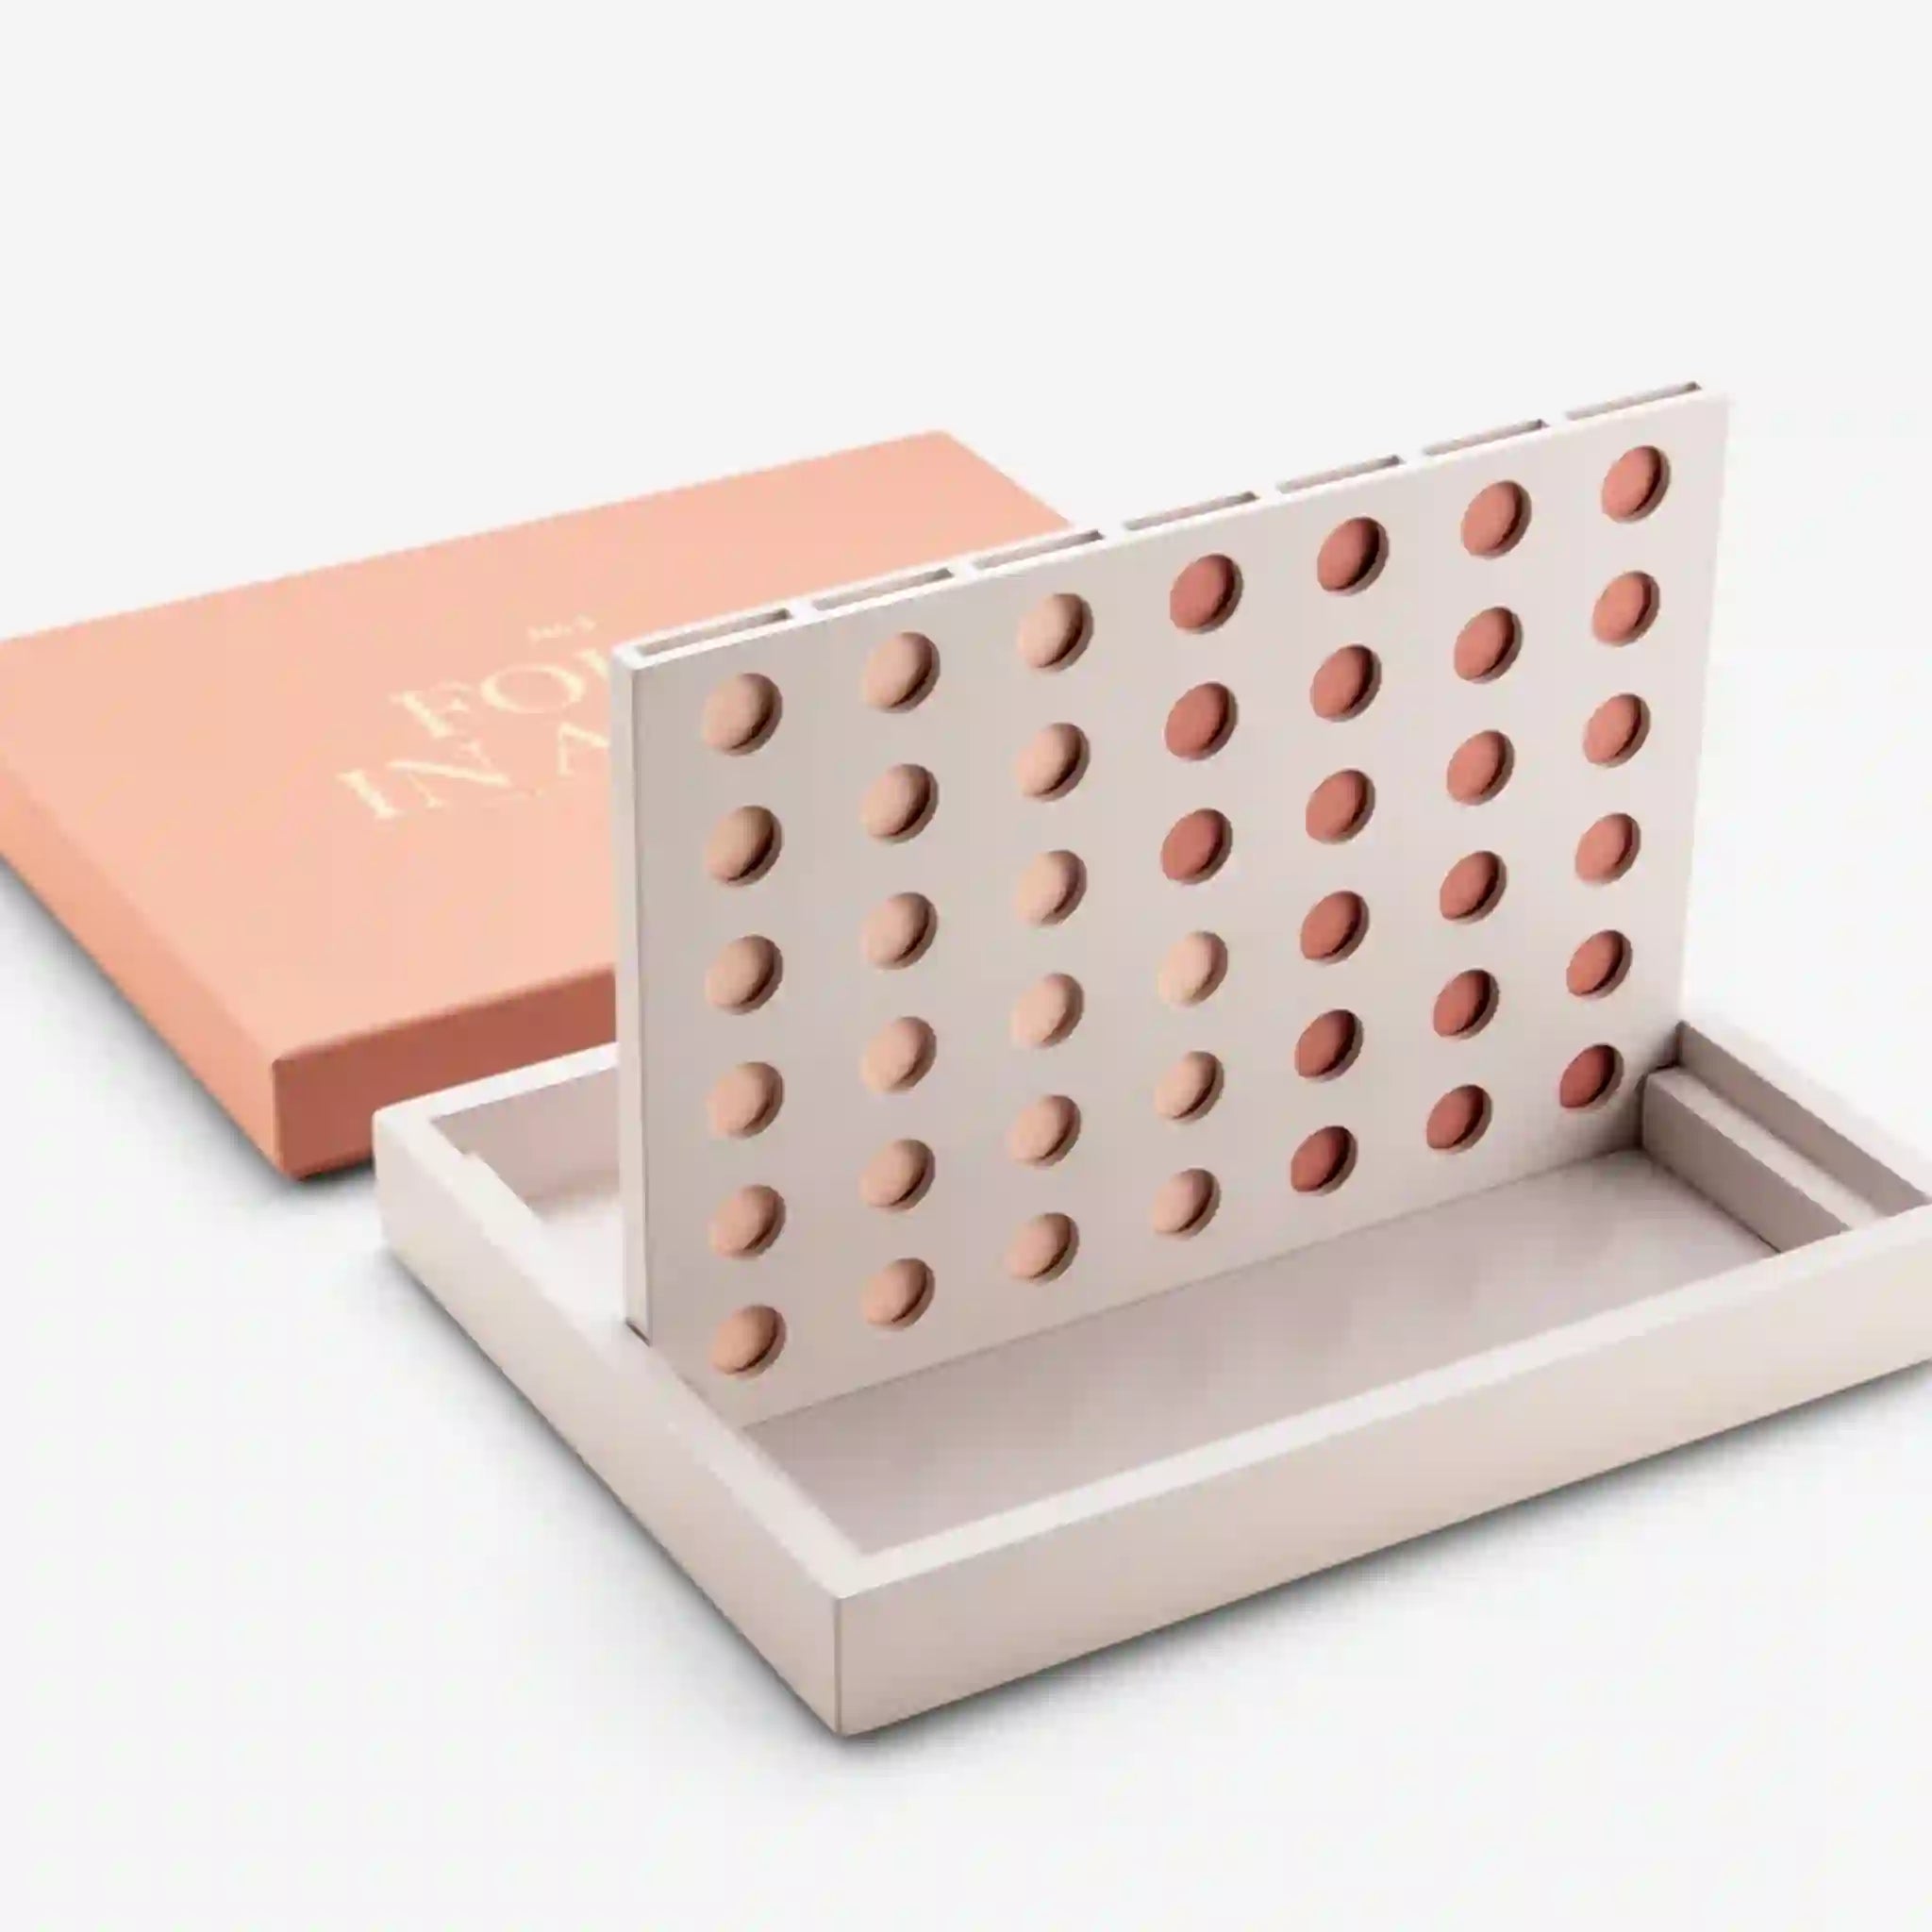 On a white background is a tan four in a row board game in a salmon pink box. 